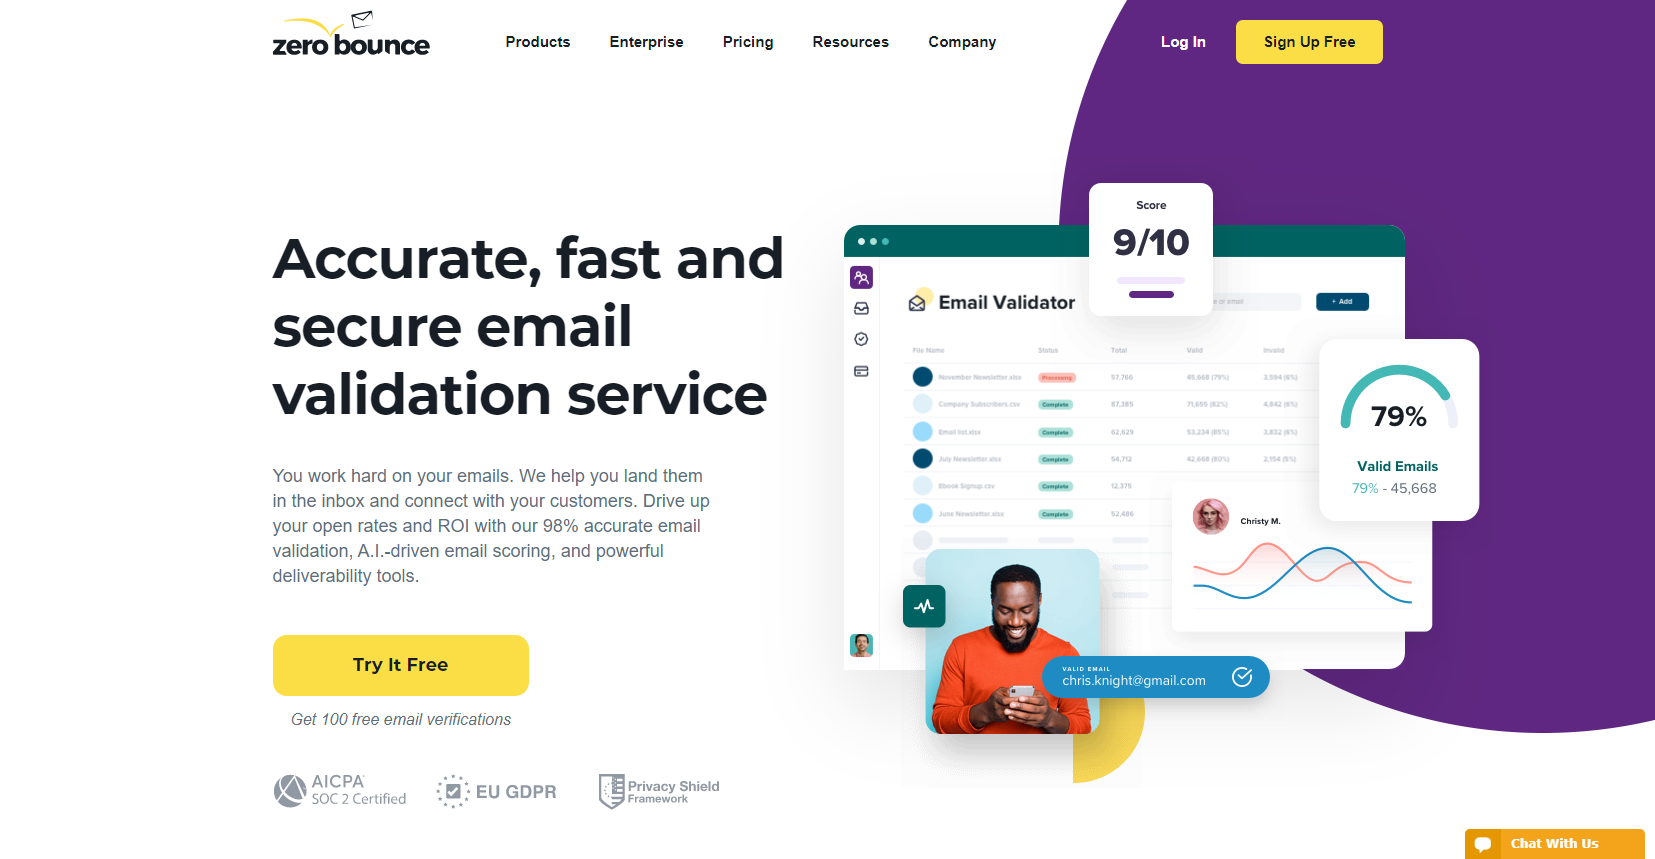 ZeroBounce Software - ZeroBounce offers accurate, fast and secure email validation